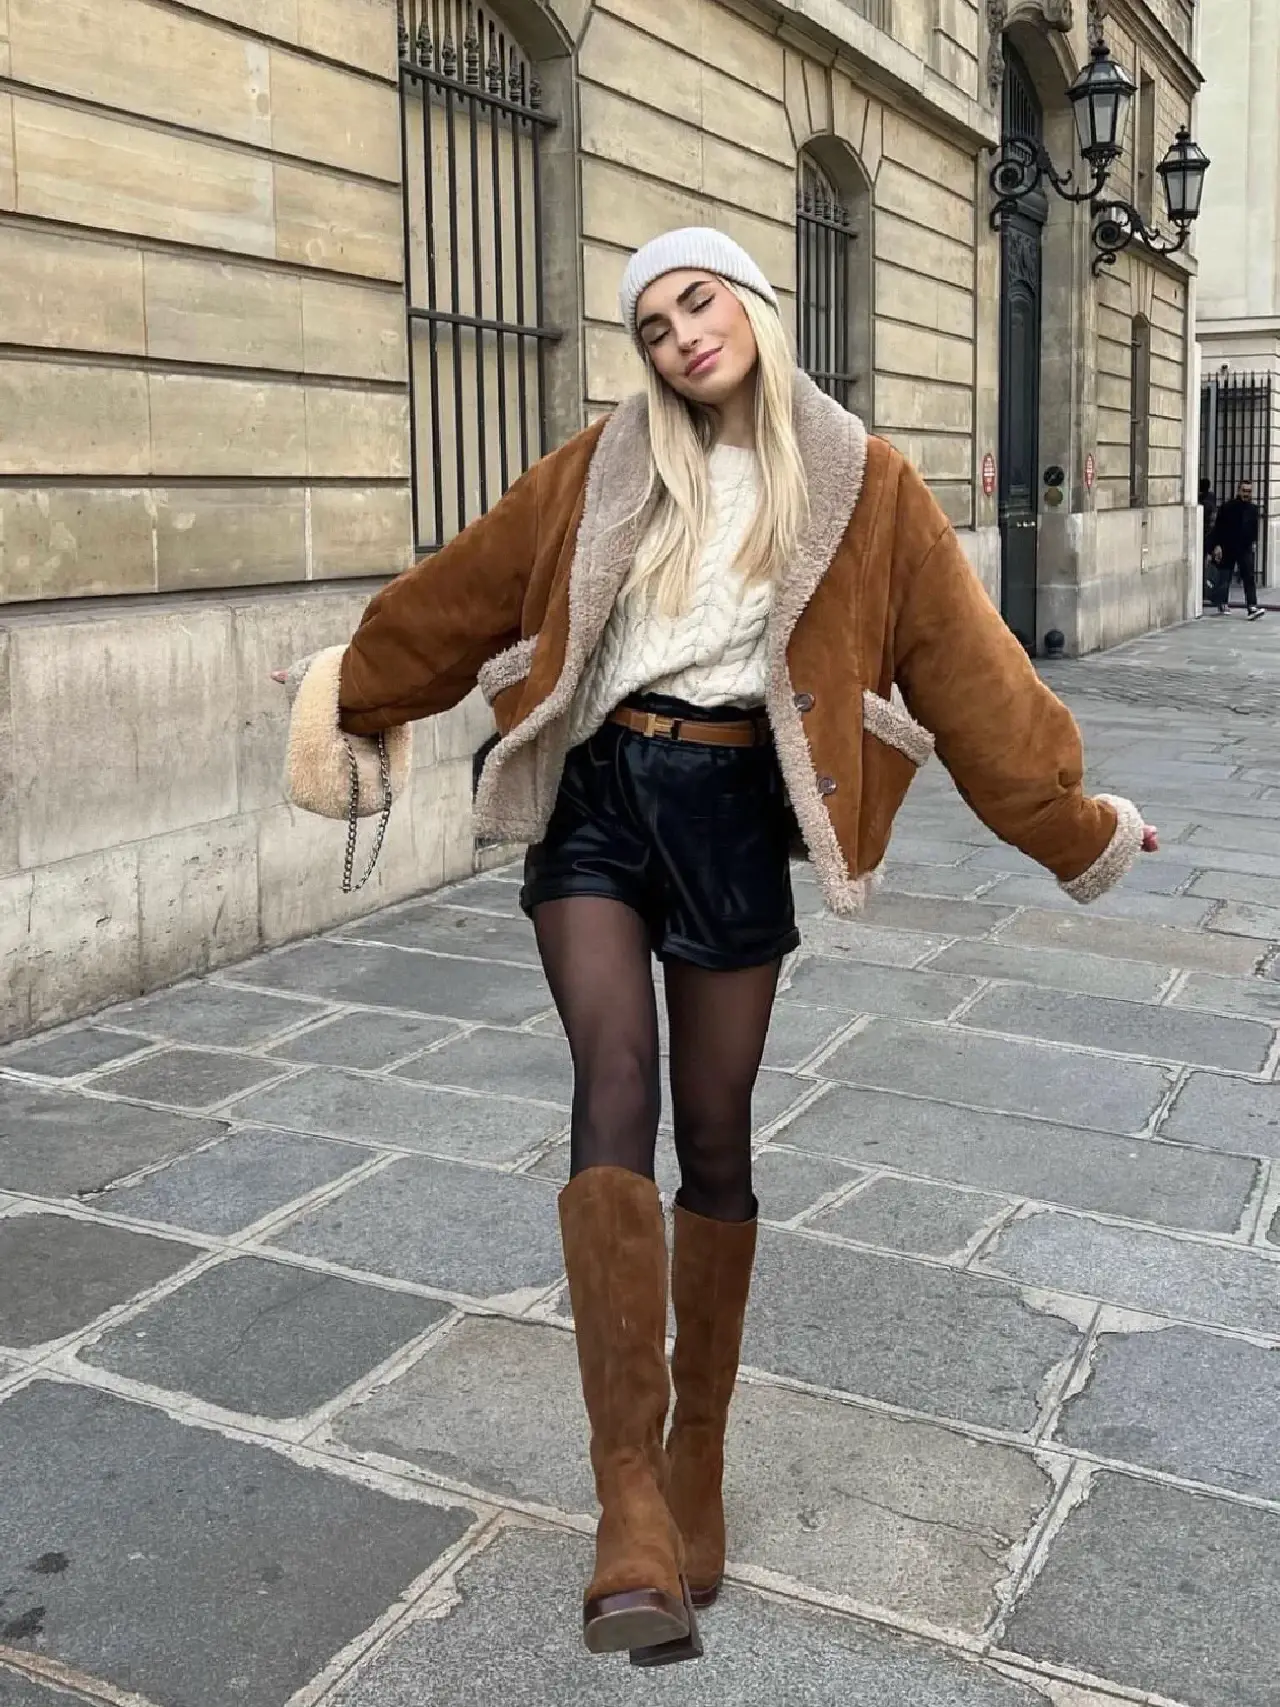 Winter Rave Outfit Idea: Nasty Gal Mesh Crop Top, Clogs, Corsets, & 28  More Rave Outfit Ideas to Try